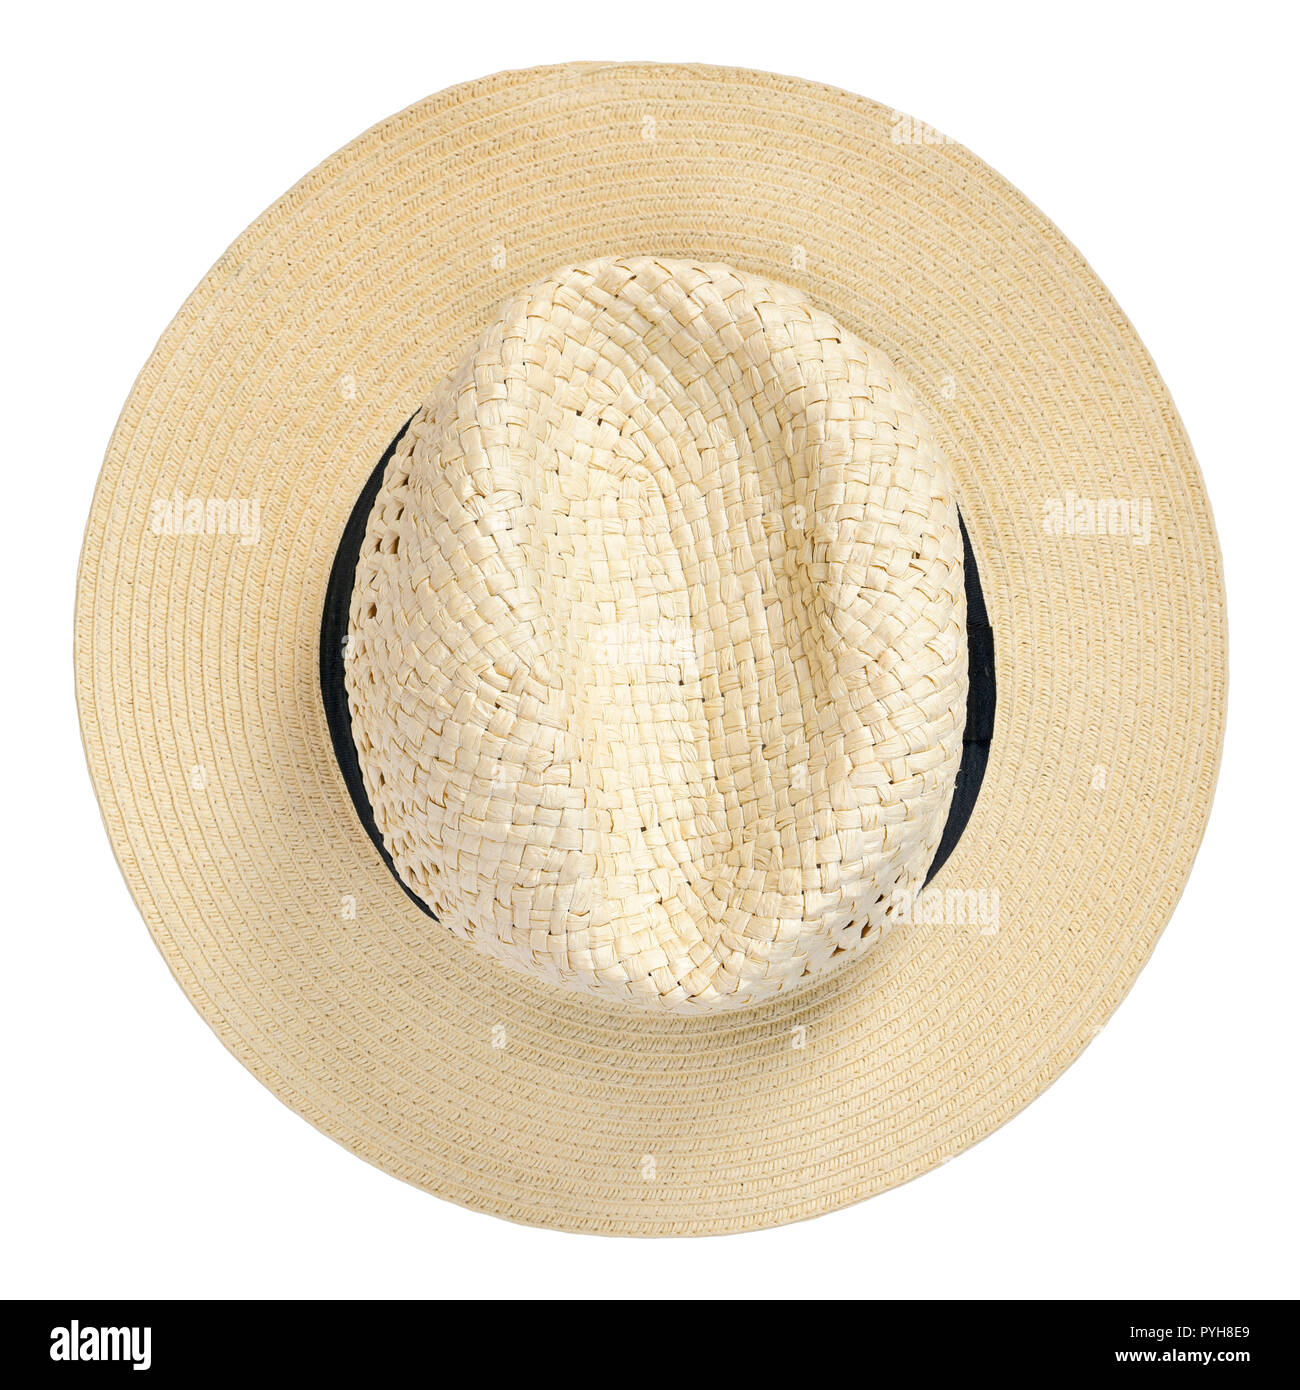 Panama hat, traditional summer hat with black hatband or ribbon, isolated on white background. Cut out object with top view or high angle view. Stock Photo